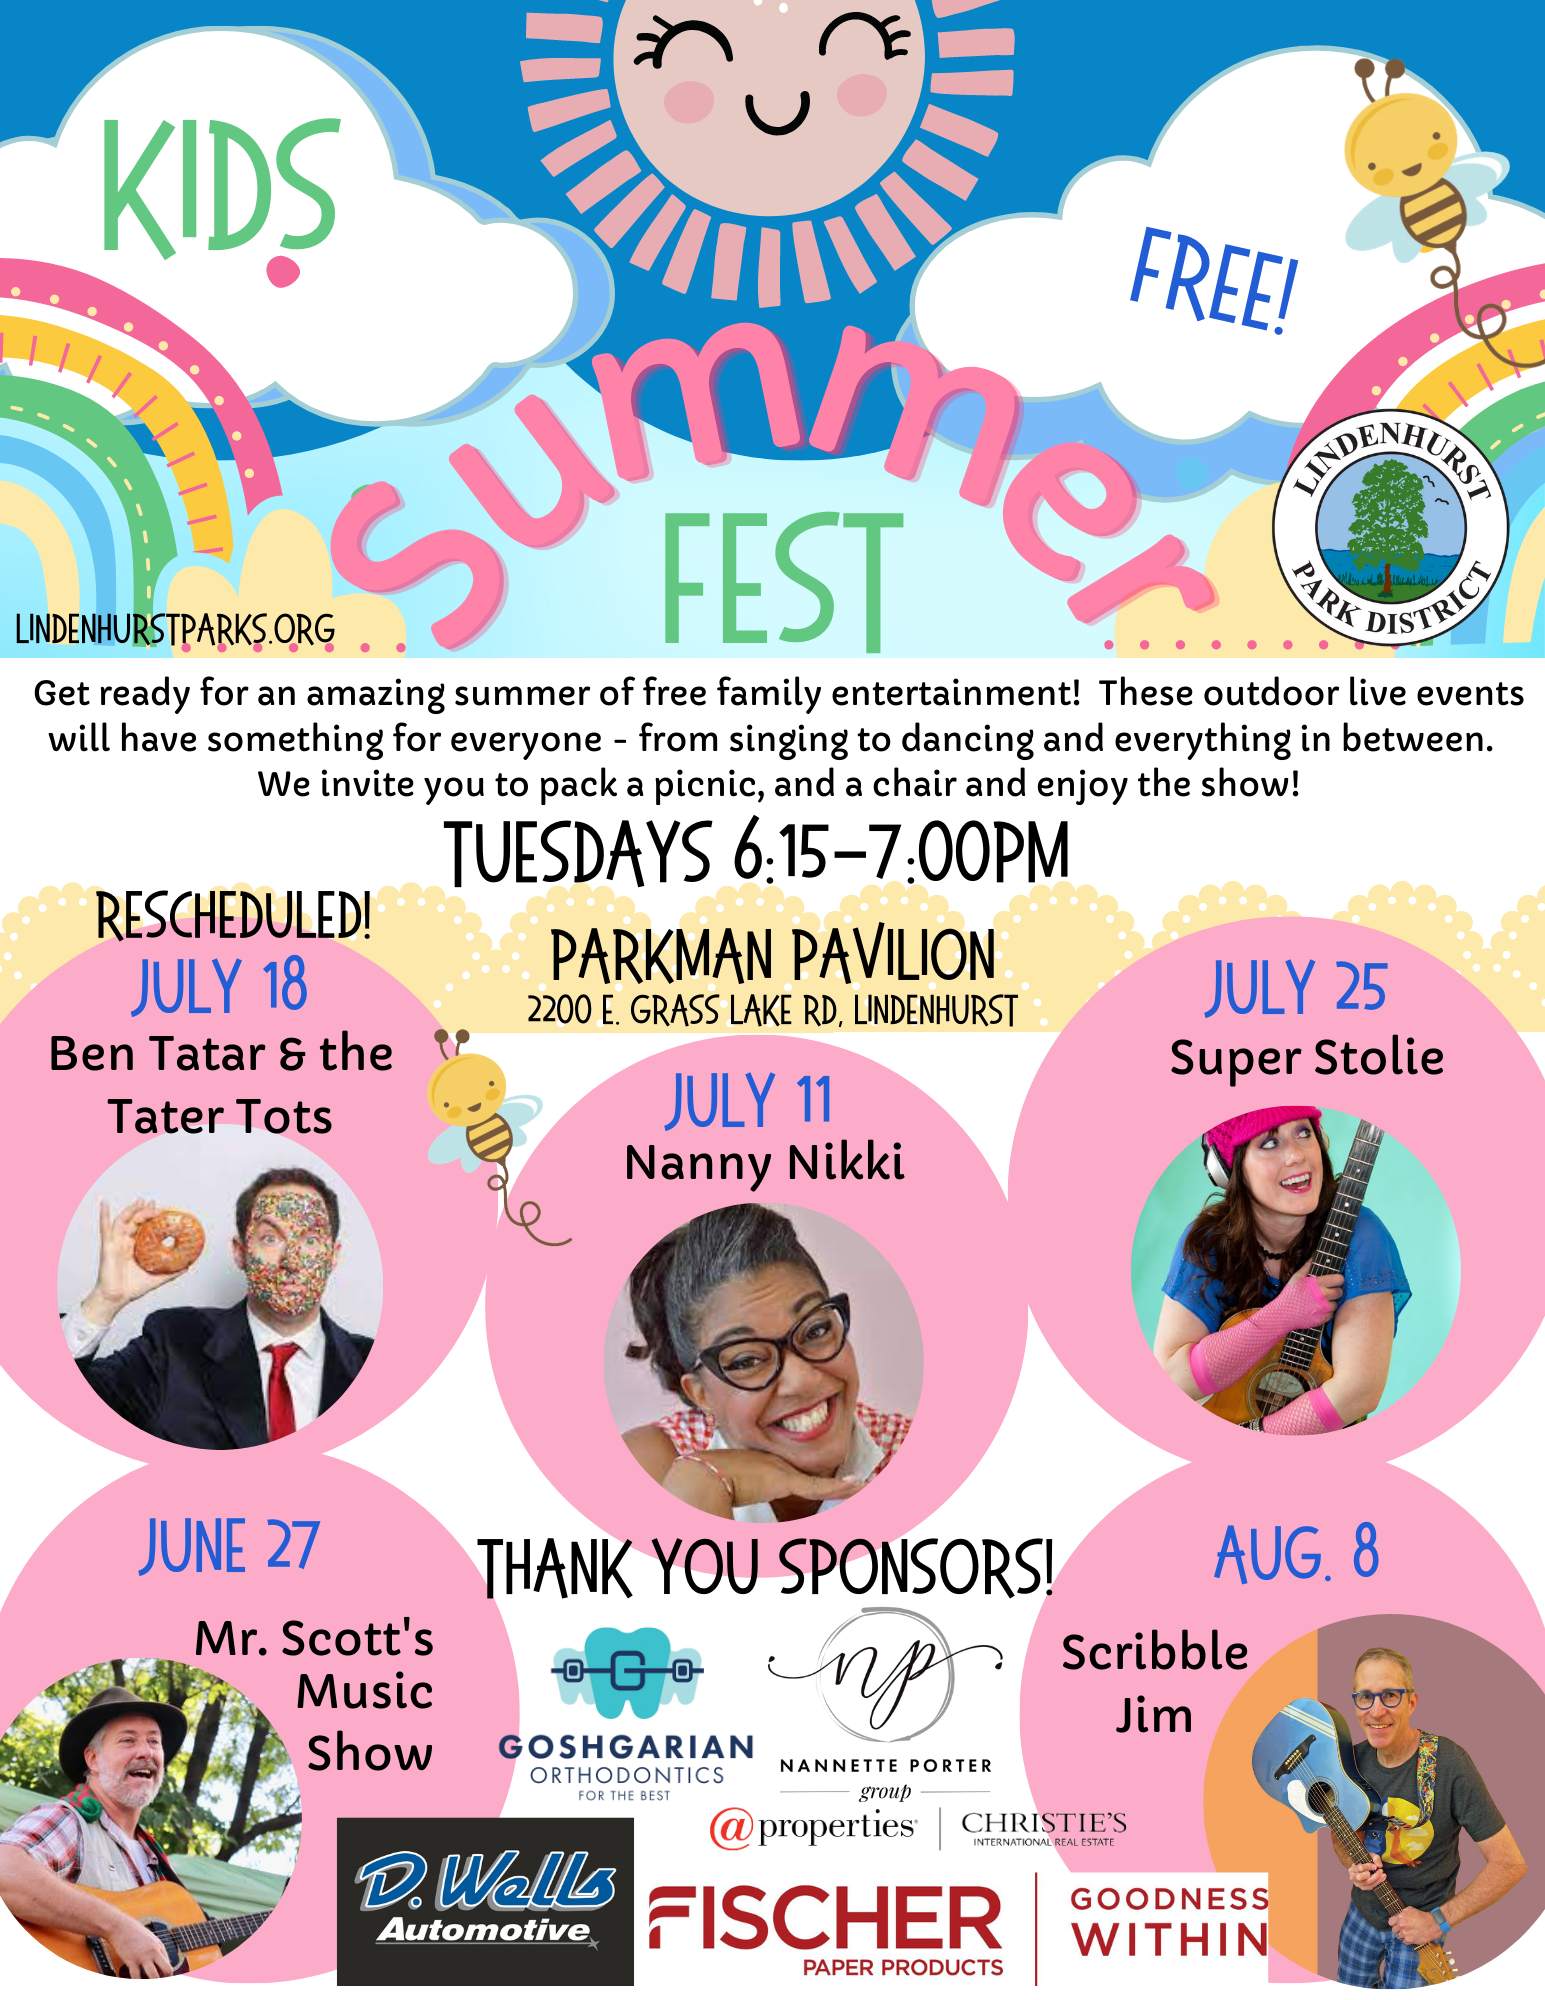 A cheerful flyer for the "KIDS Summer Fest," a series of free family entertainment events on Tuesdays at Parkman Pavilion, featuring live performances by various artists including Ben Tatar, Nanny Nikki, Mr. Scott's Music Show, Super Stolie, and Scribble Jim. The flyer notes rescheduled dates, invites families to pack a picnic, and thanks the sponsors. The events are organized by the Lindenhurst Park District